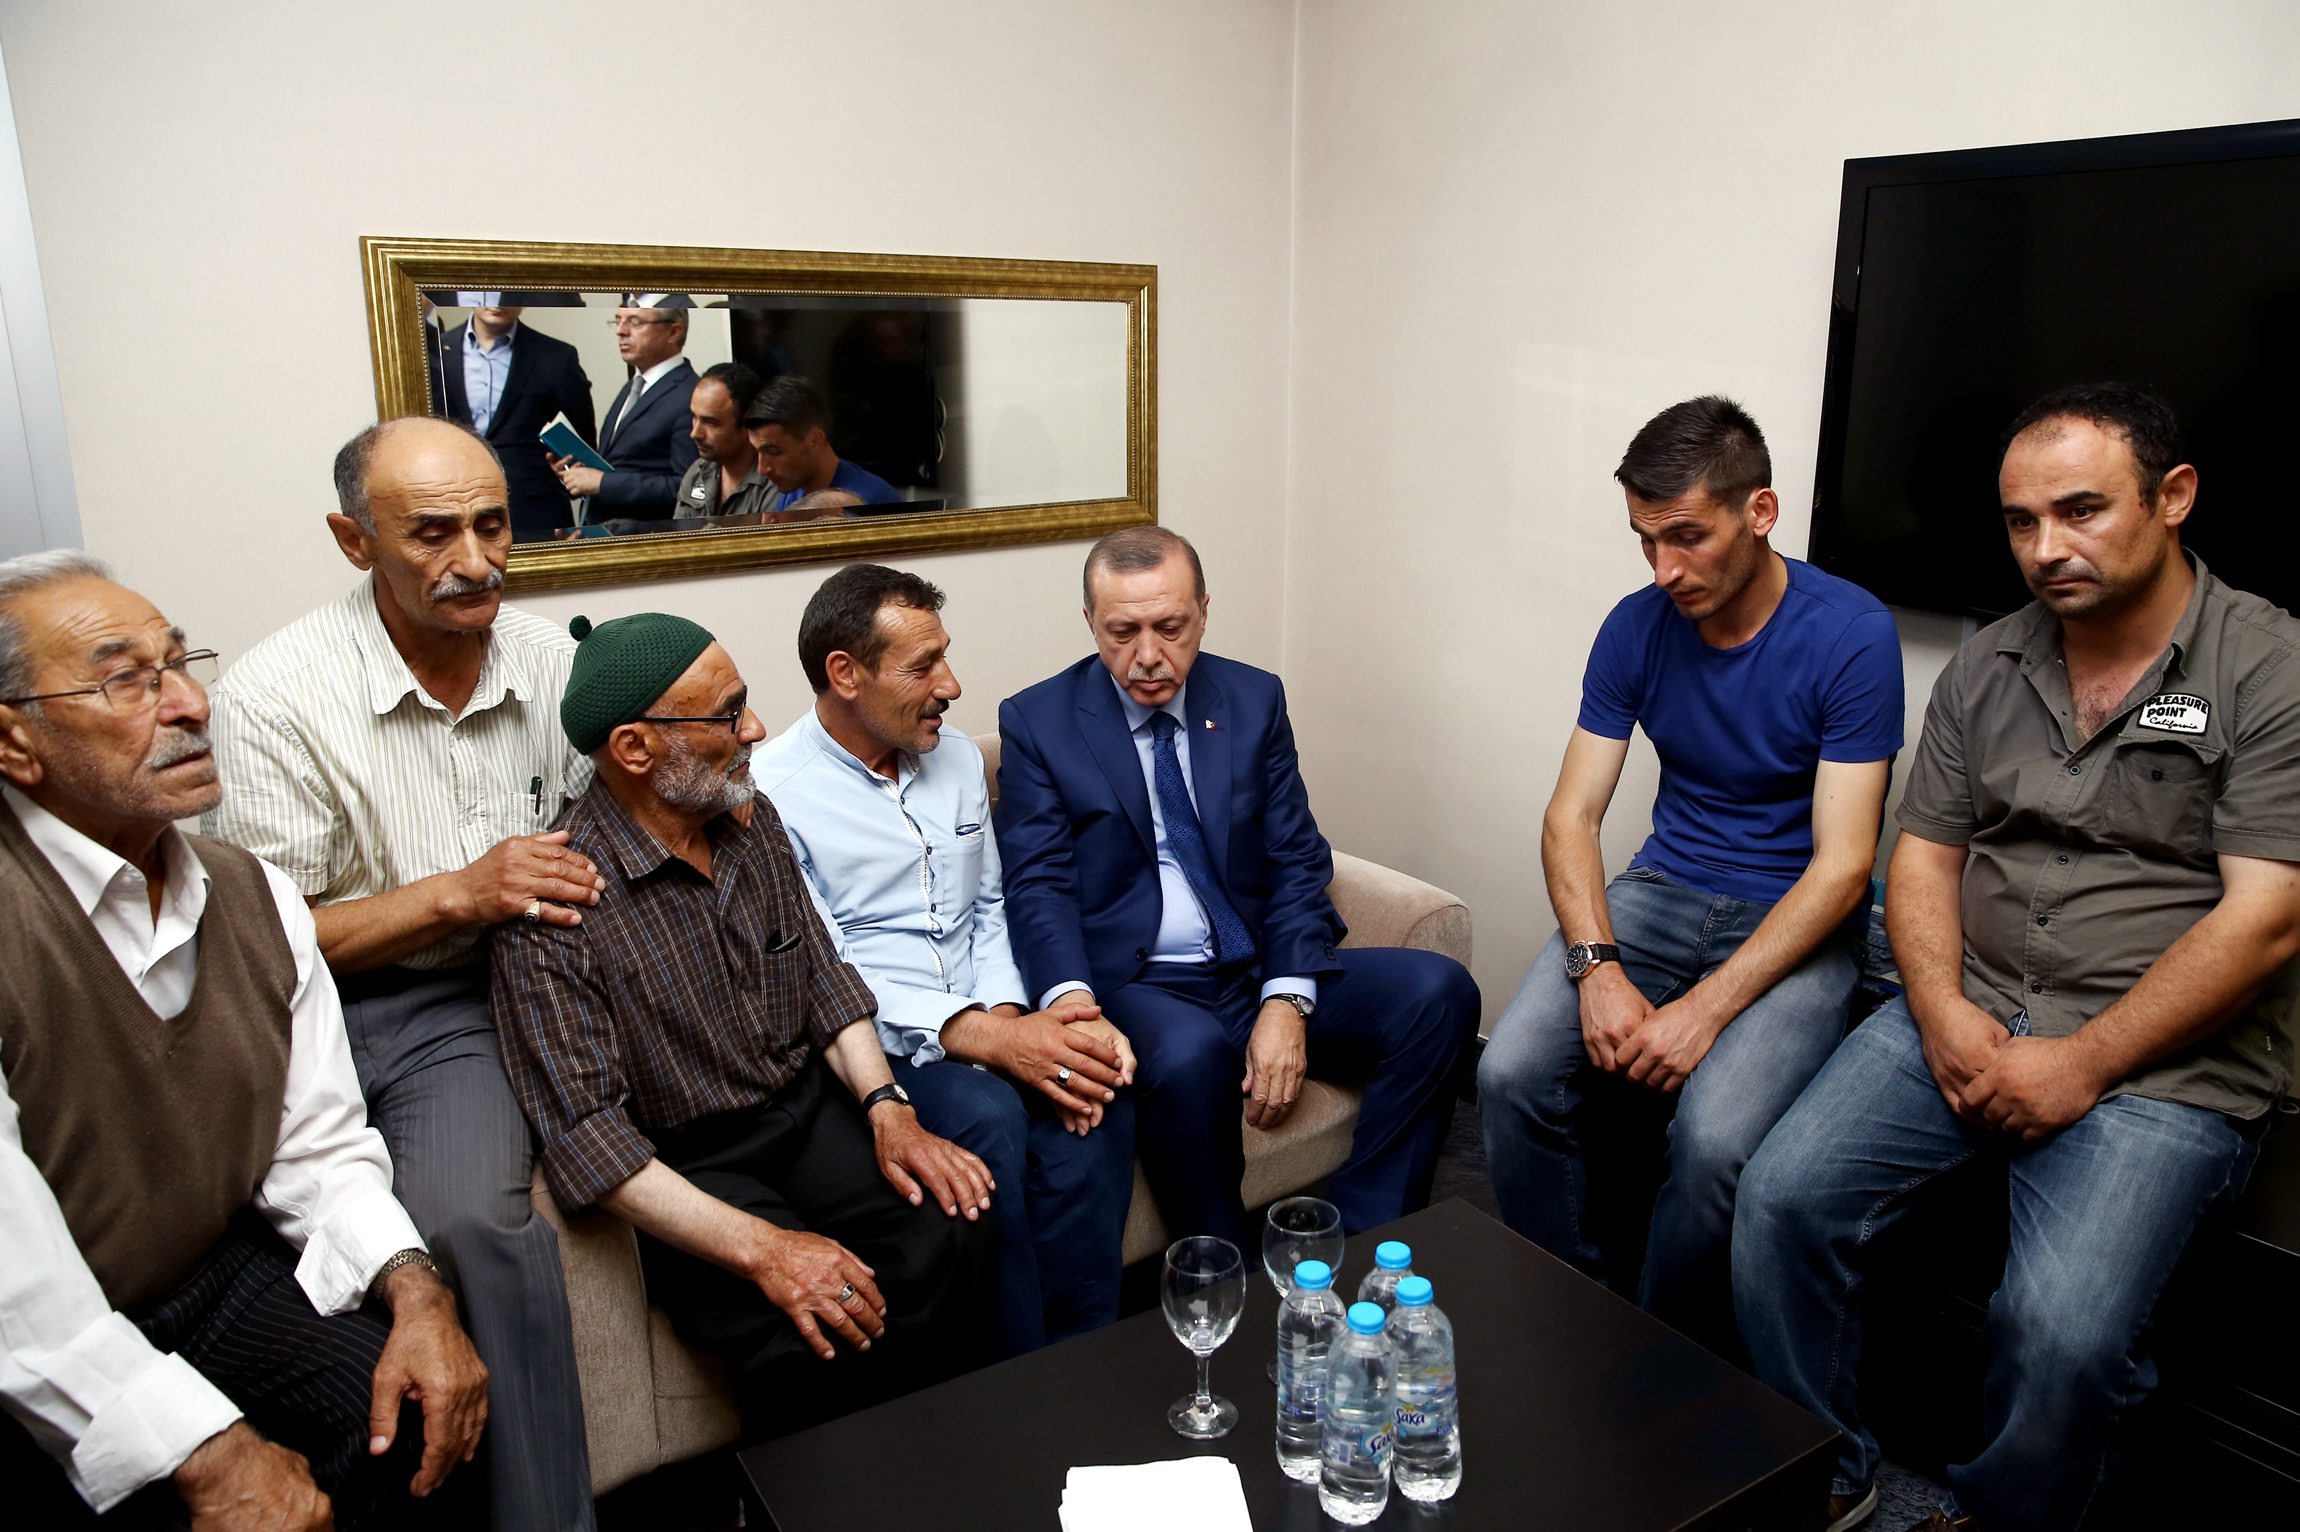 President Recep Tayyip Erdoğan visited the family of the martyr for democracy, Oğuzhan Yaşar, who was wounded in front of the Presidential Palace during the July 15 coup attempt and later died on Wednesday, Aug.t 3.